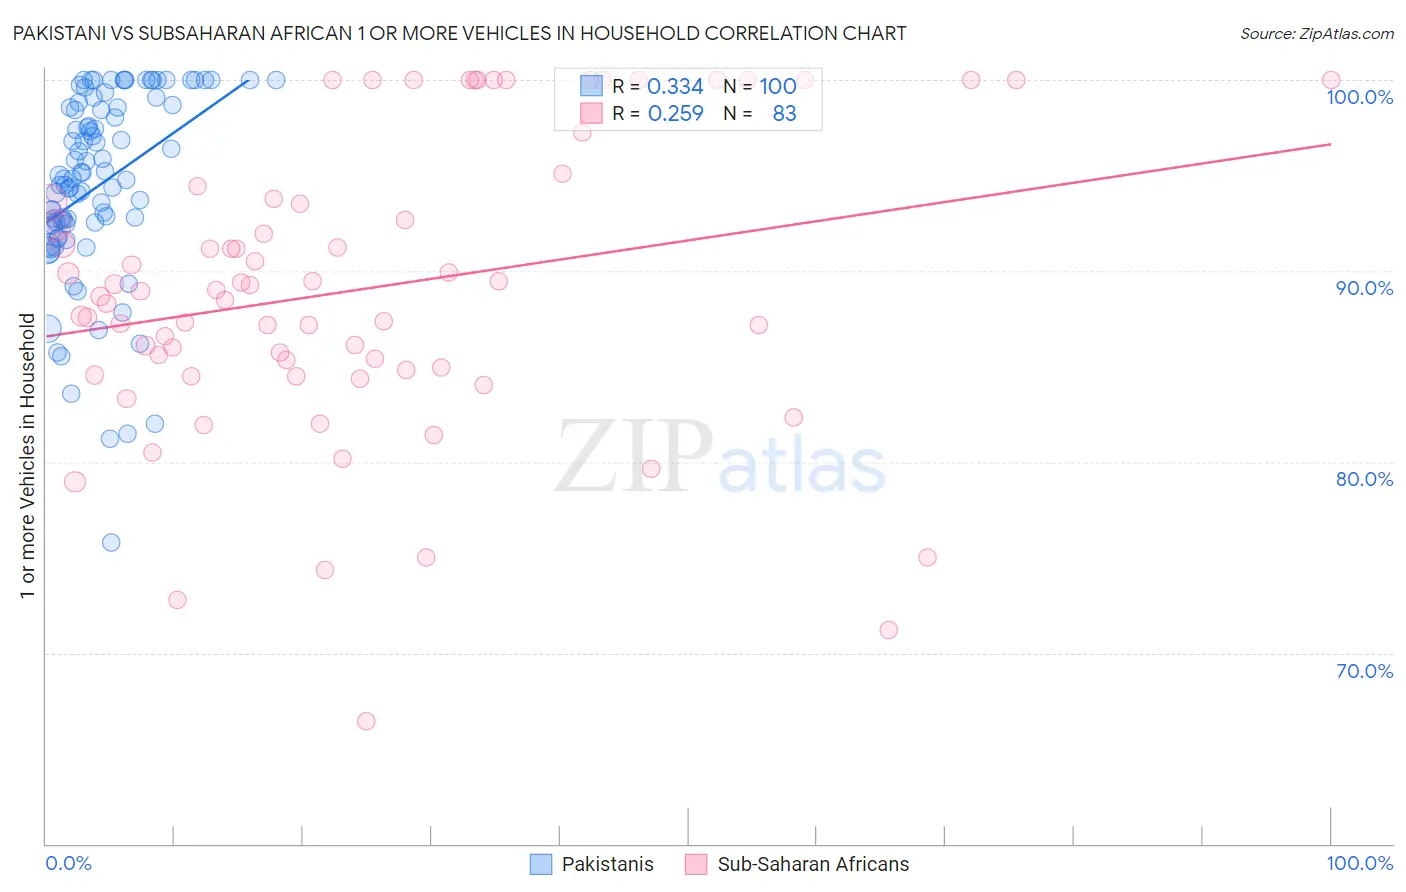 Pakistani vs Subsaharan African 1 or more Vehicles in Household